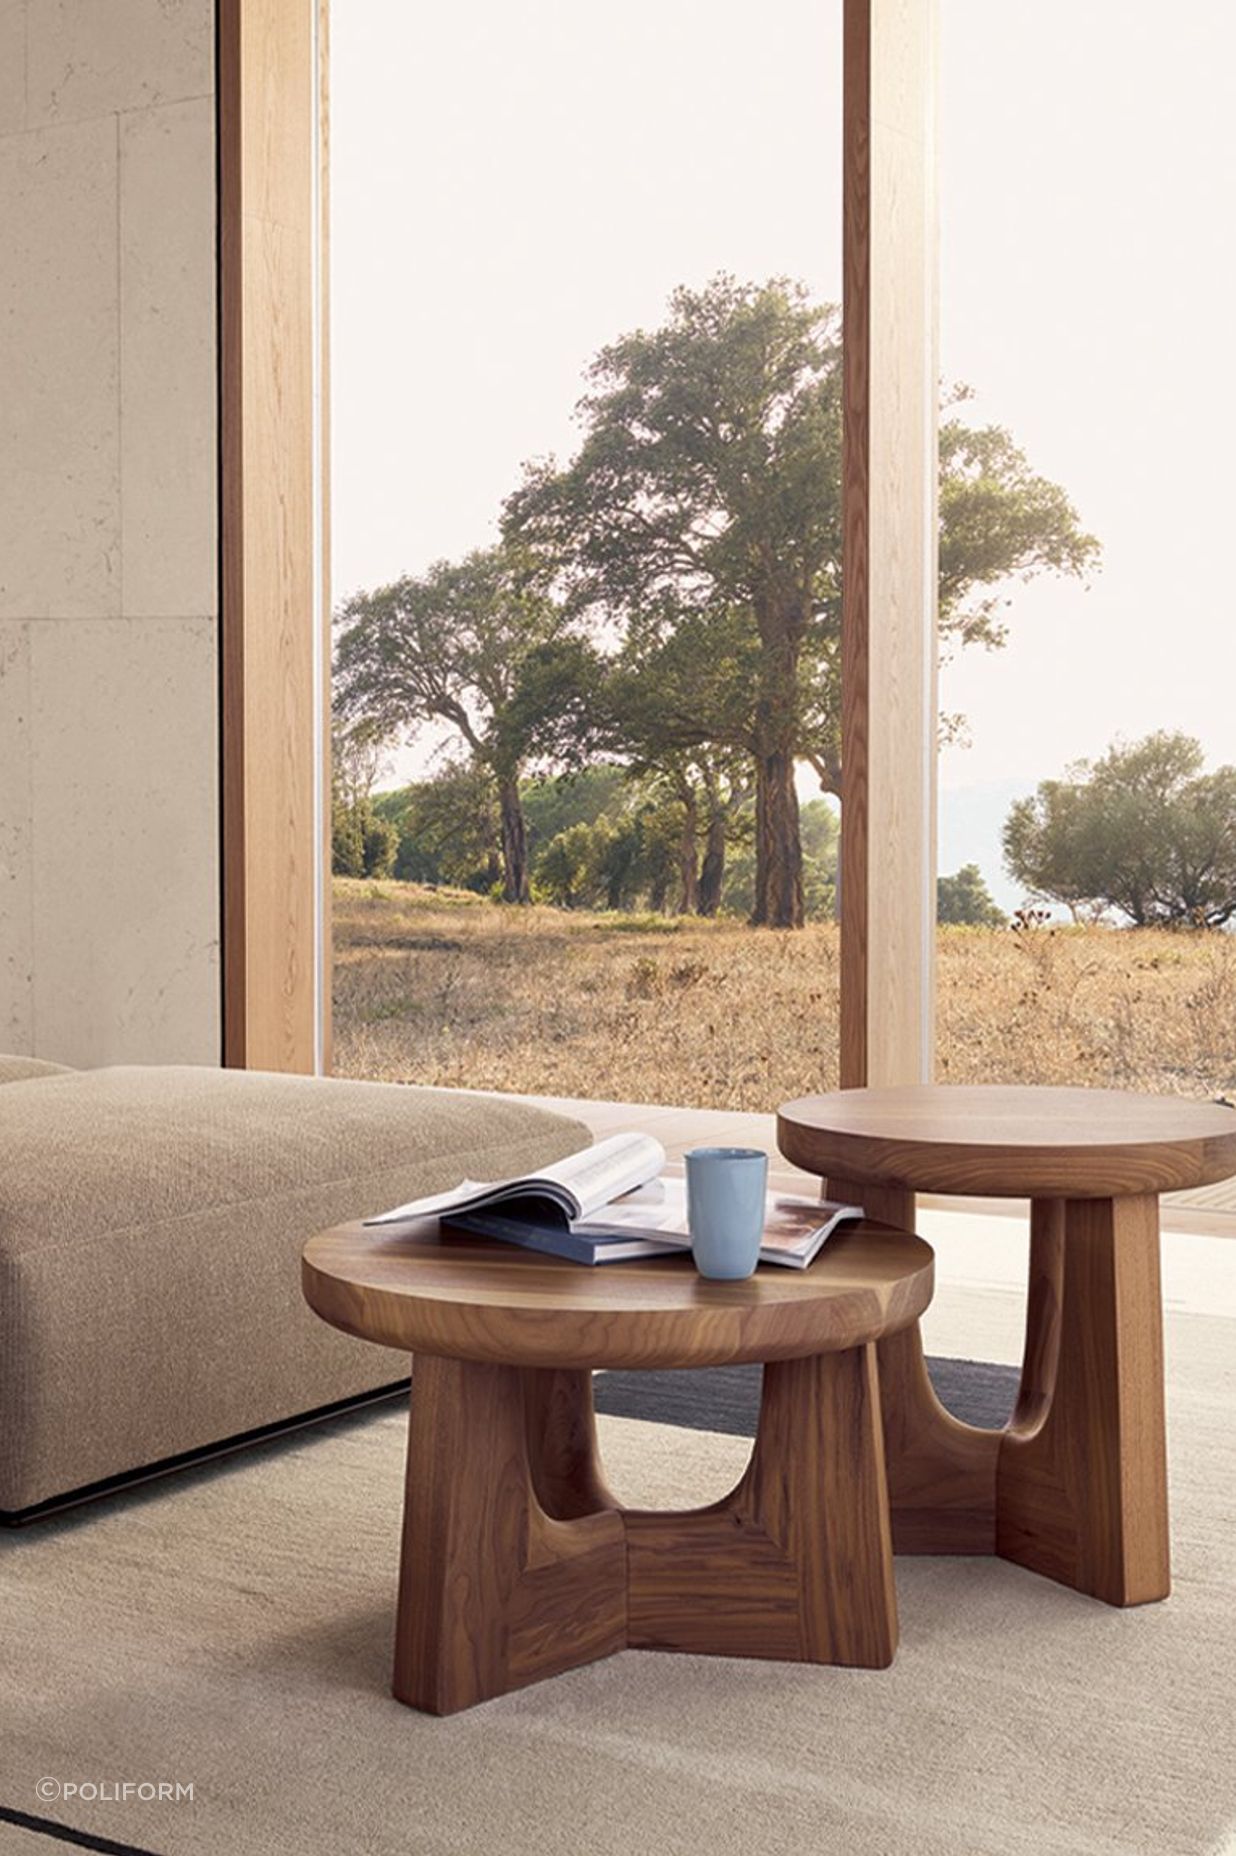 A stool coffee table can offer you an additional seating option when needed. Featured product: Nara Coffee Table.